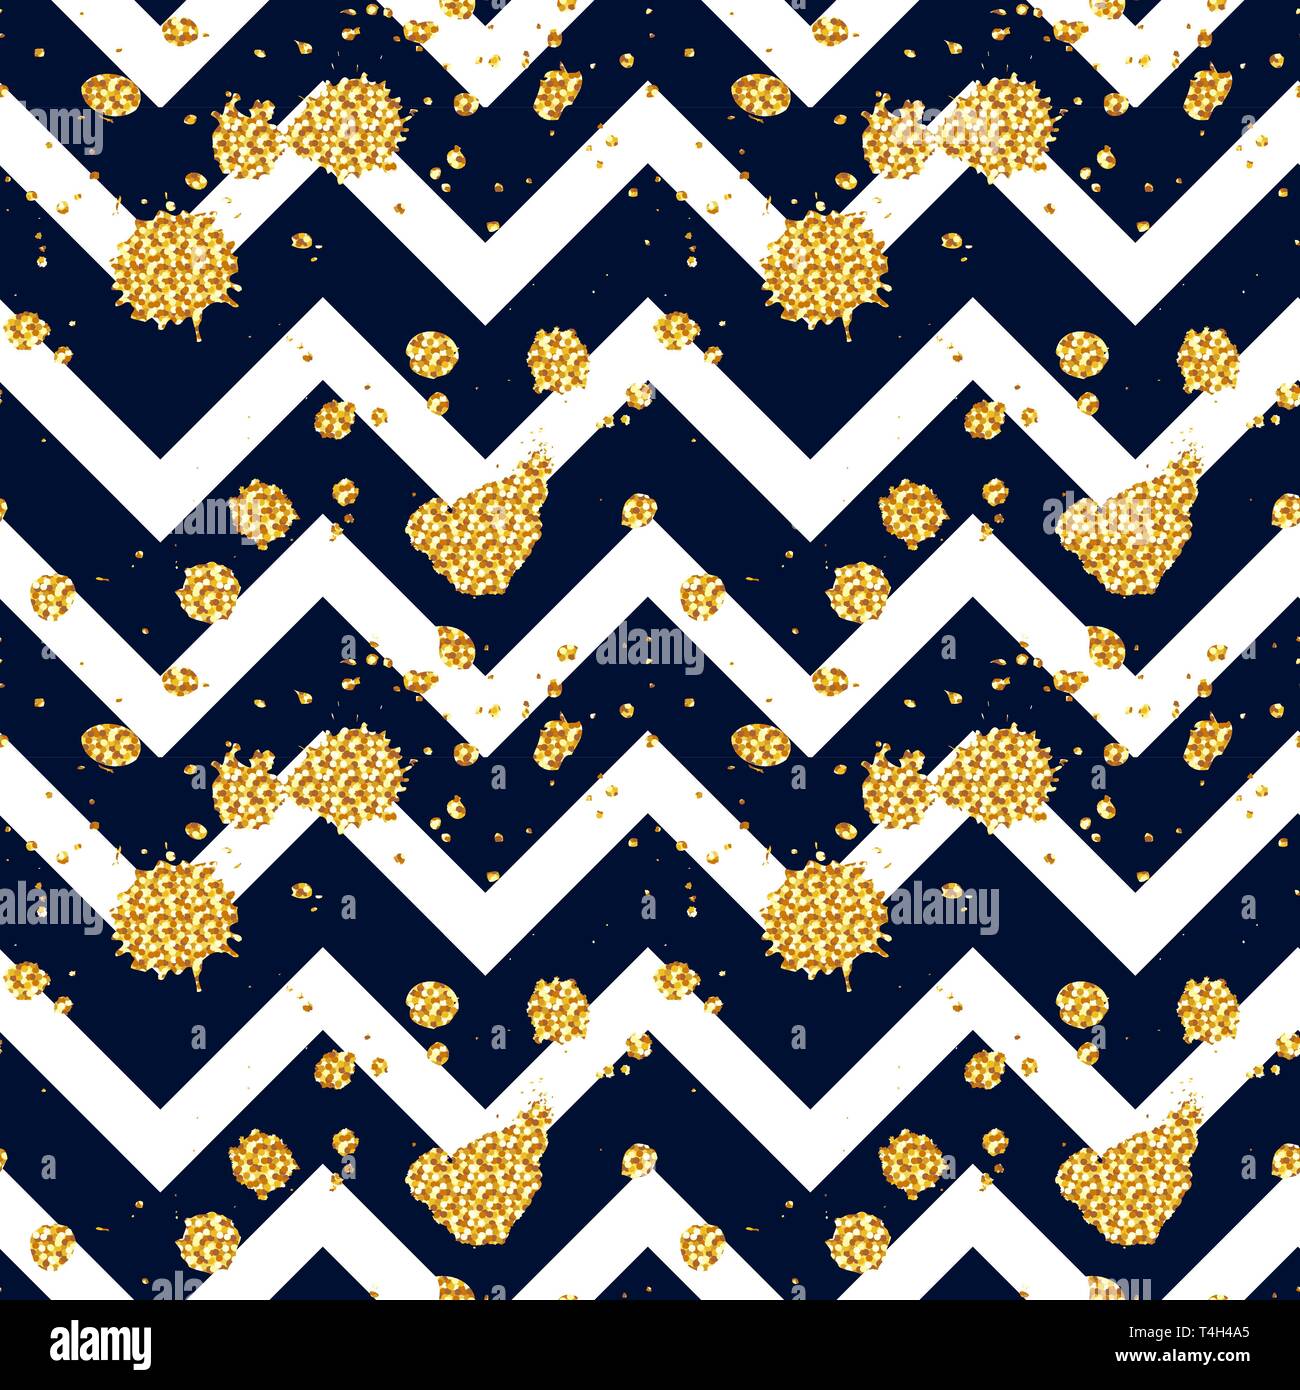 Seamless pattern with glittering splashes and stains on chevron background. Vector illustration. Stock Vector